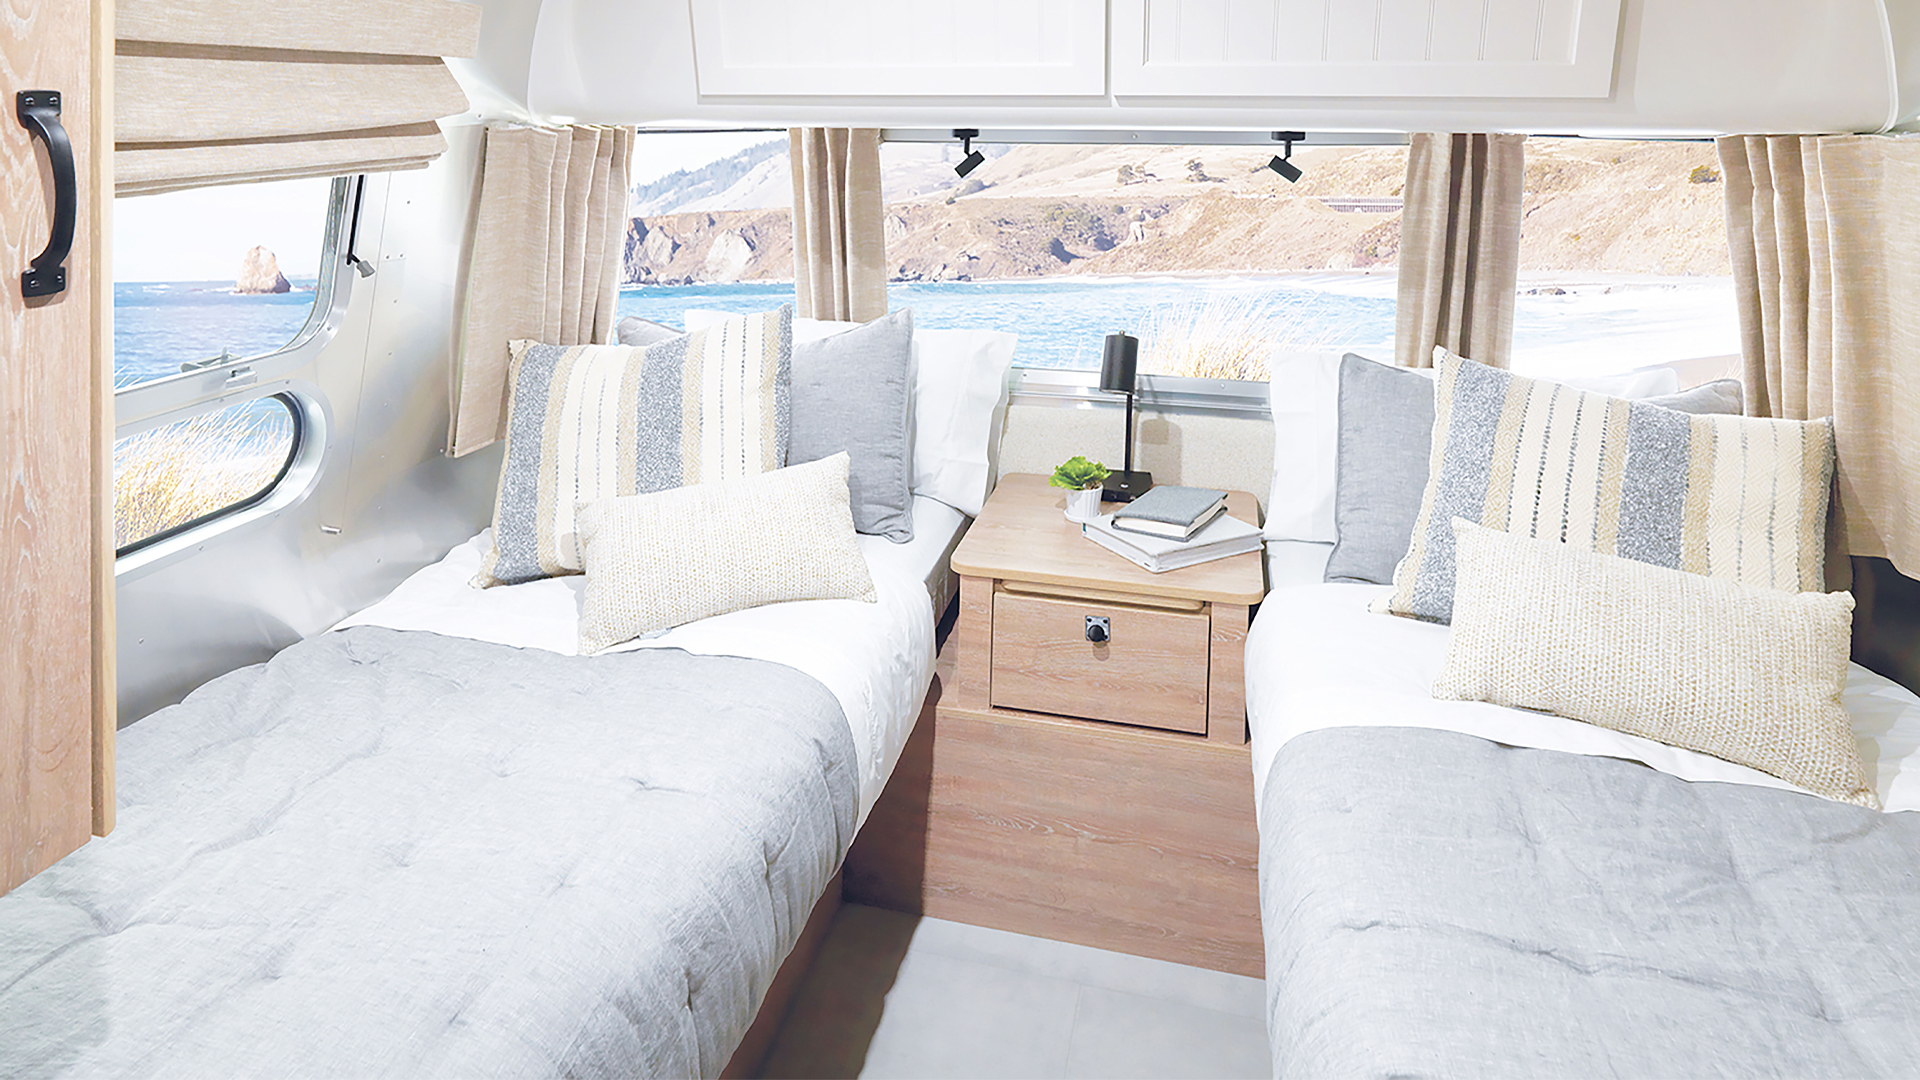 Airstream Pottery Barn Special Edition Travel Trailer bedroom with twin beds and side table looking out at the ocean